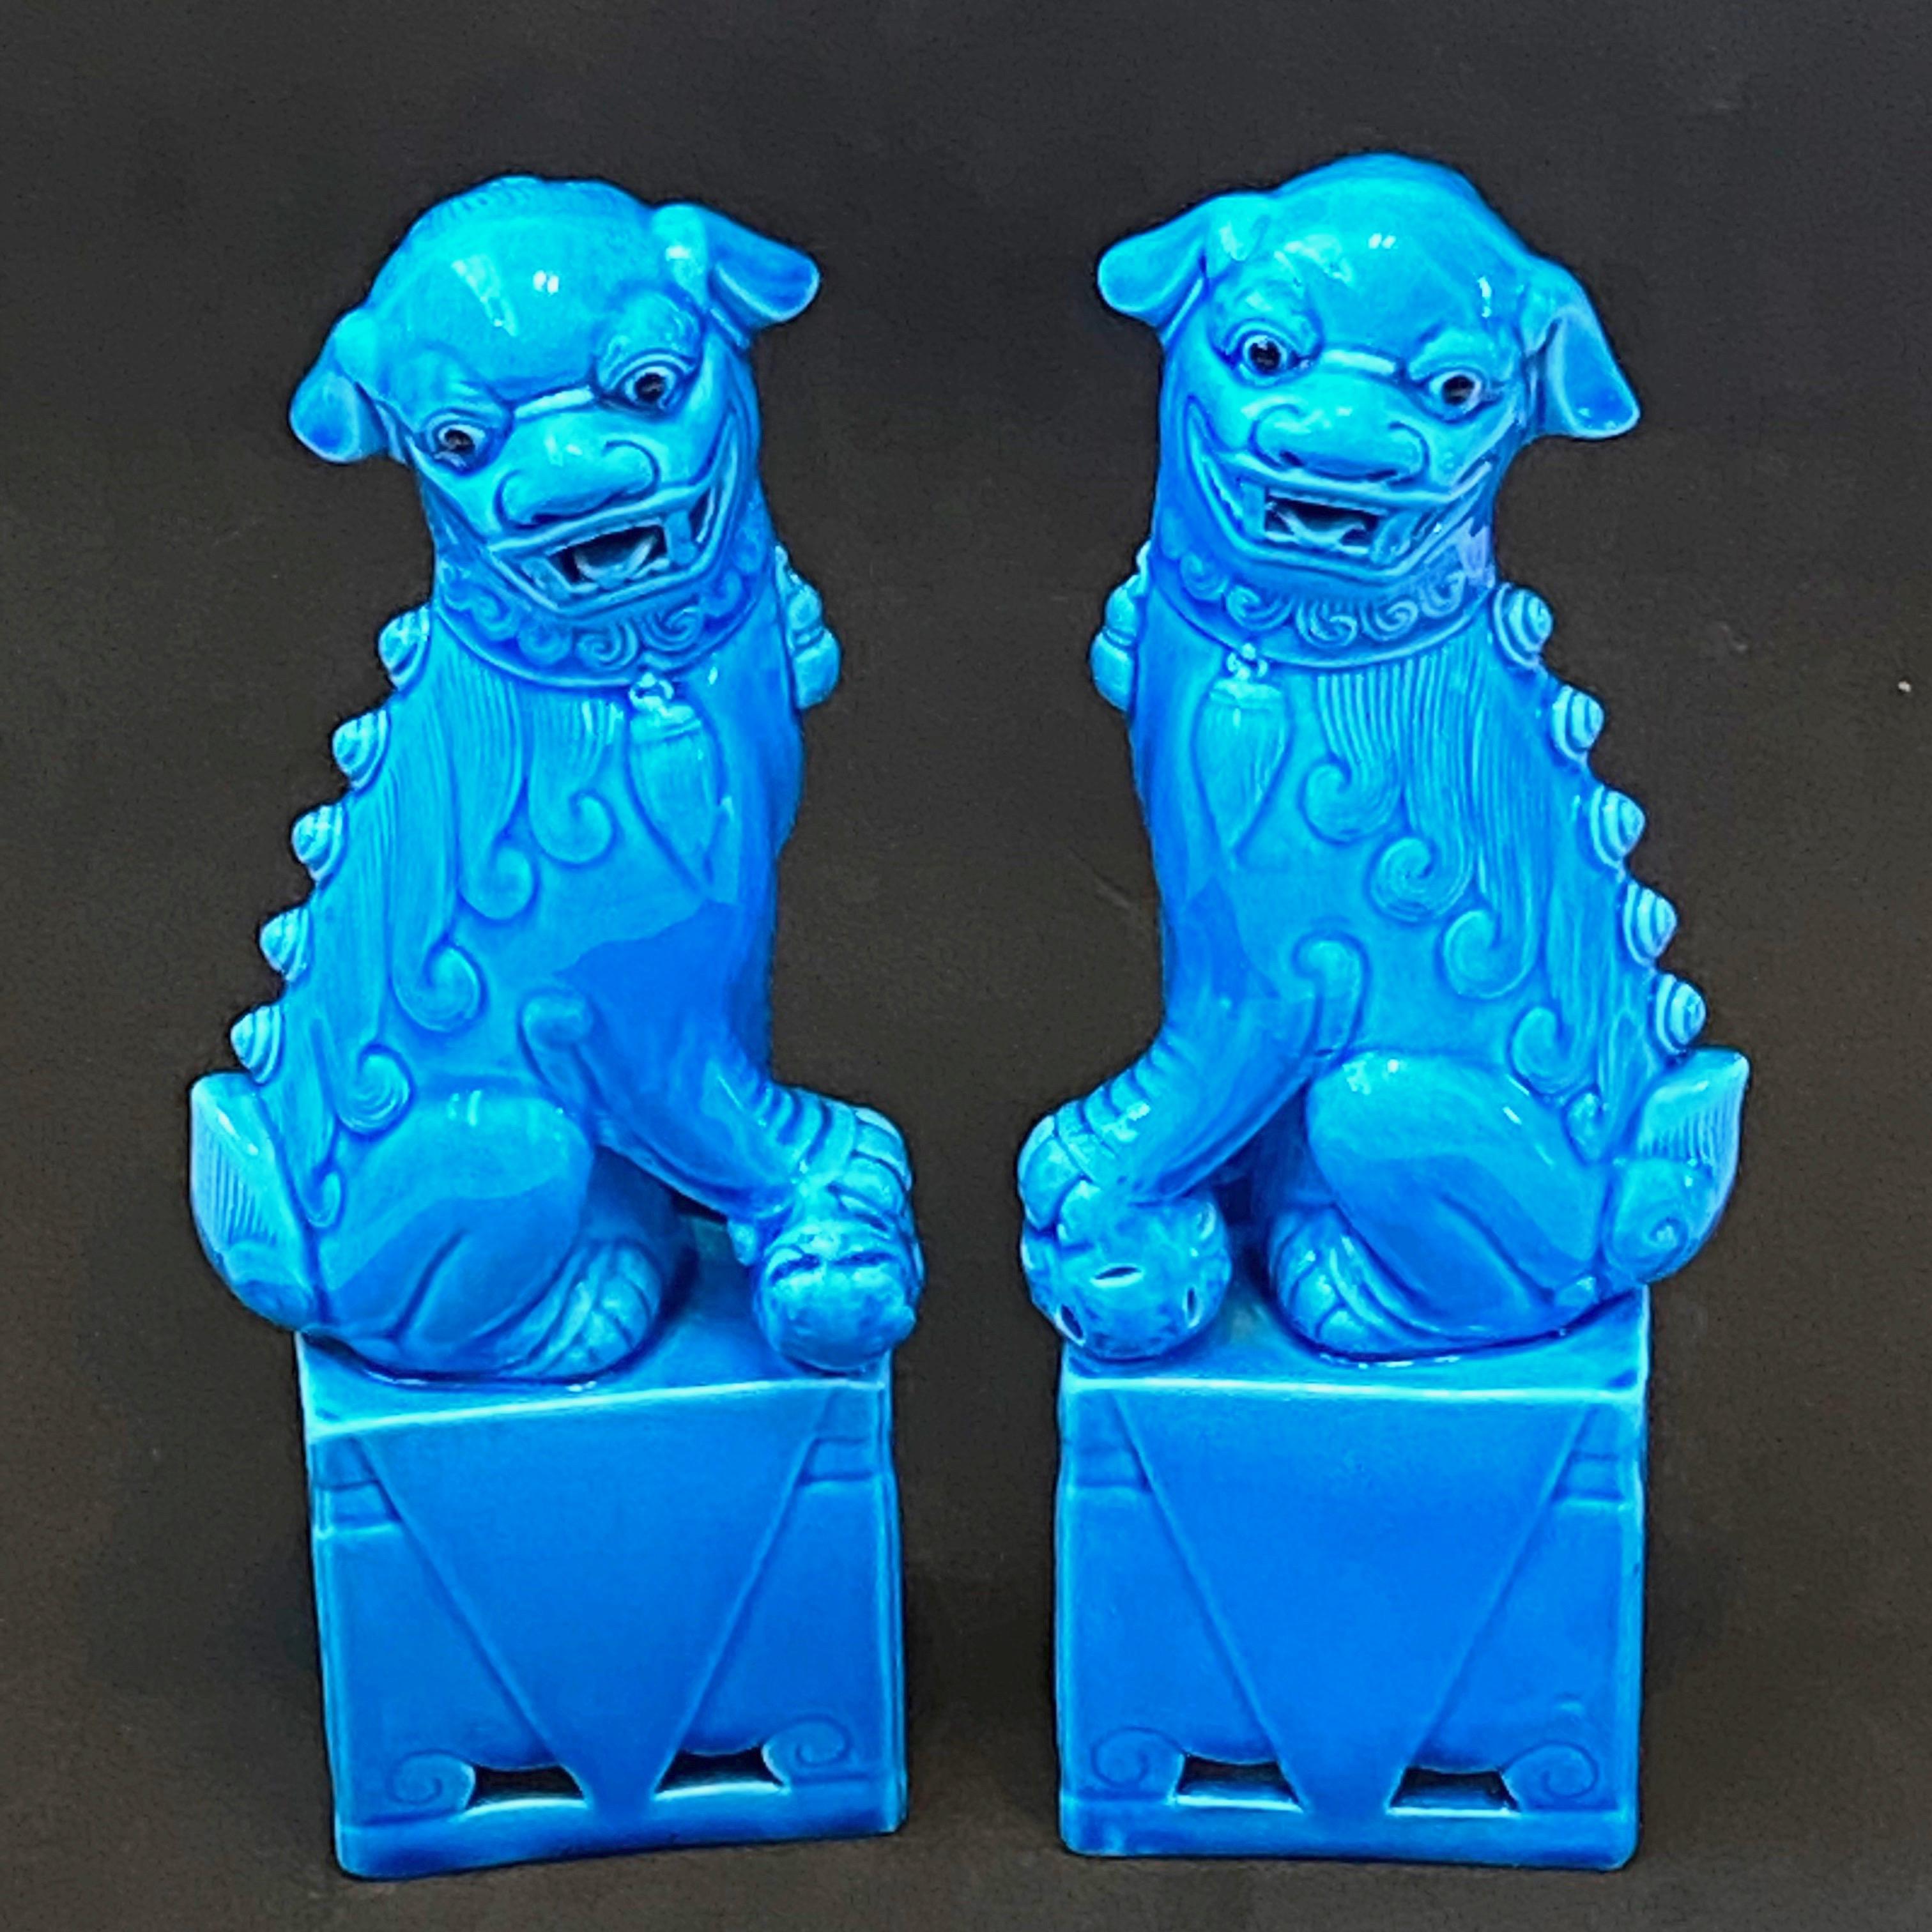 A very nice pair of vintage, medium size, turquoise blue, ceramic foo dogs, circa 1960s. Excellent condition and patina; makes a fun decor item in any room!